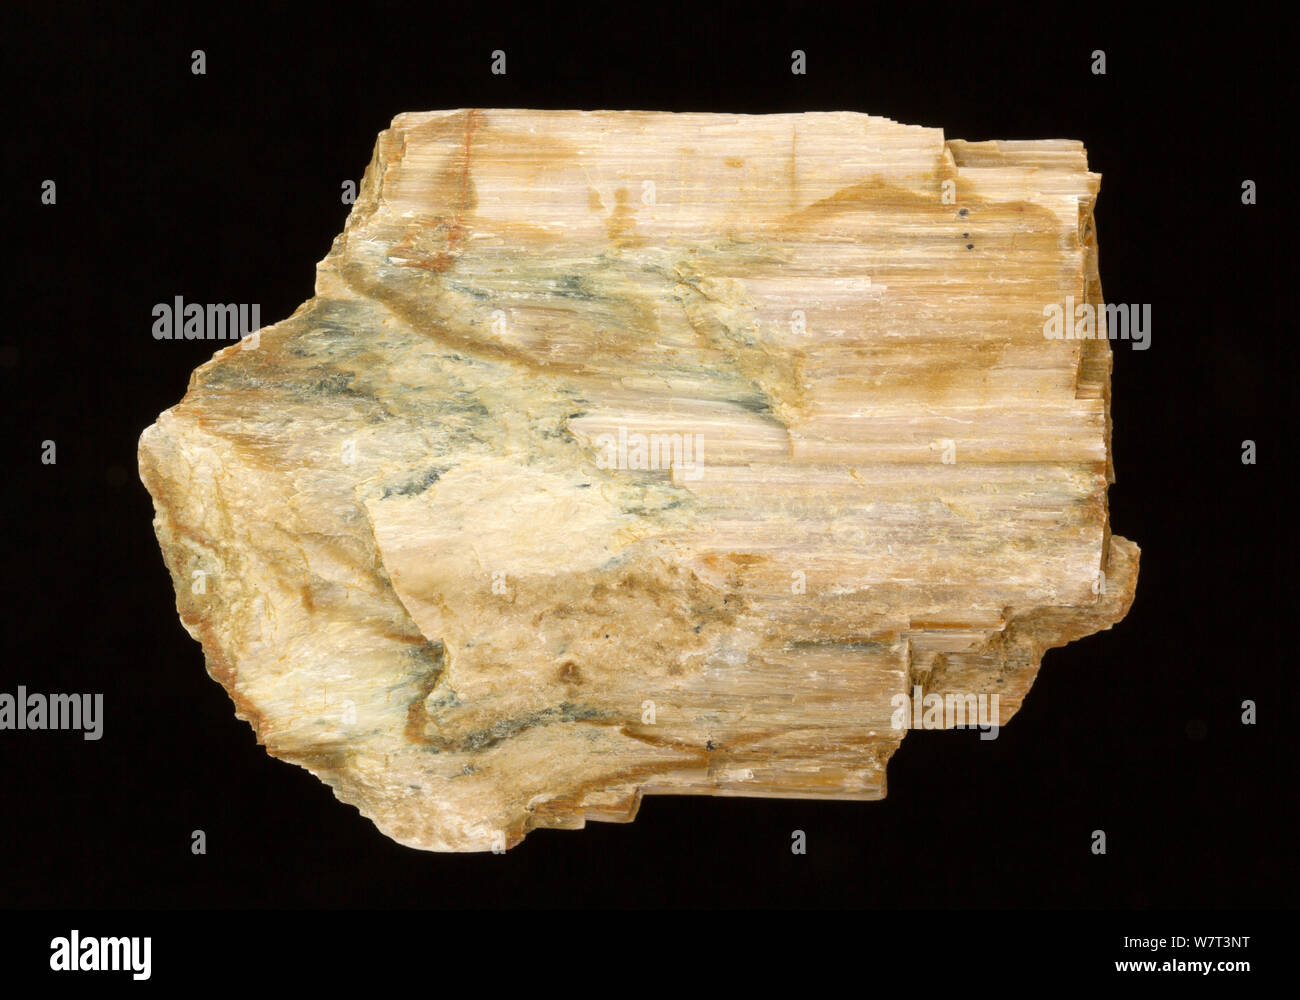 Anthophyllite, ((Mg,Fe)7Si8O22(OH)2) a type of Amphibole mineral, from South Finland Stock Photo